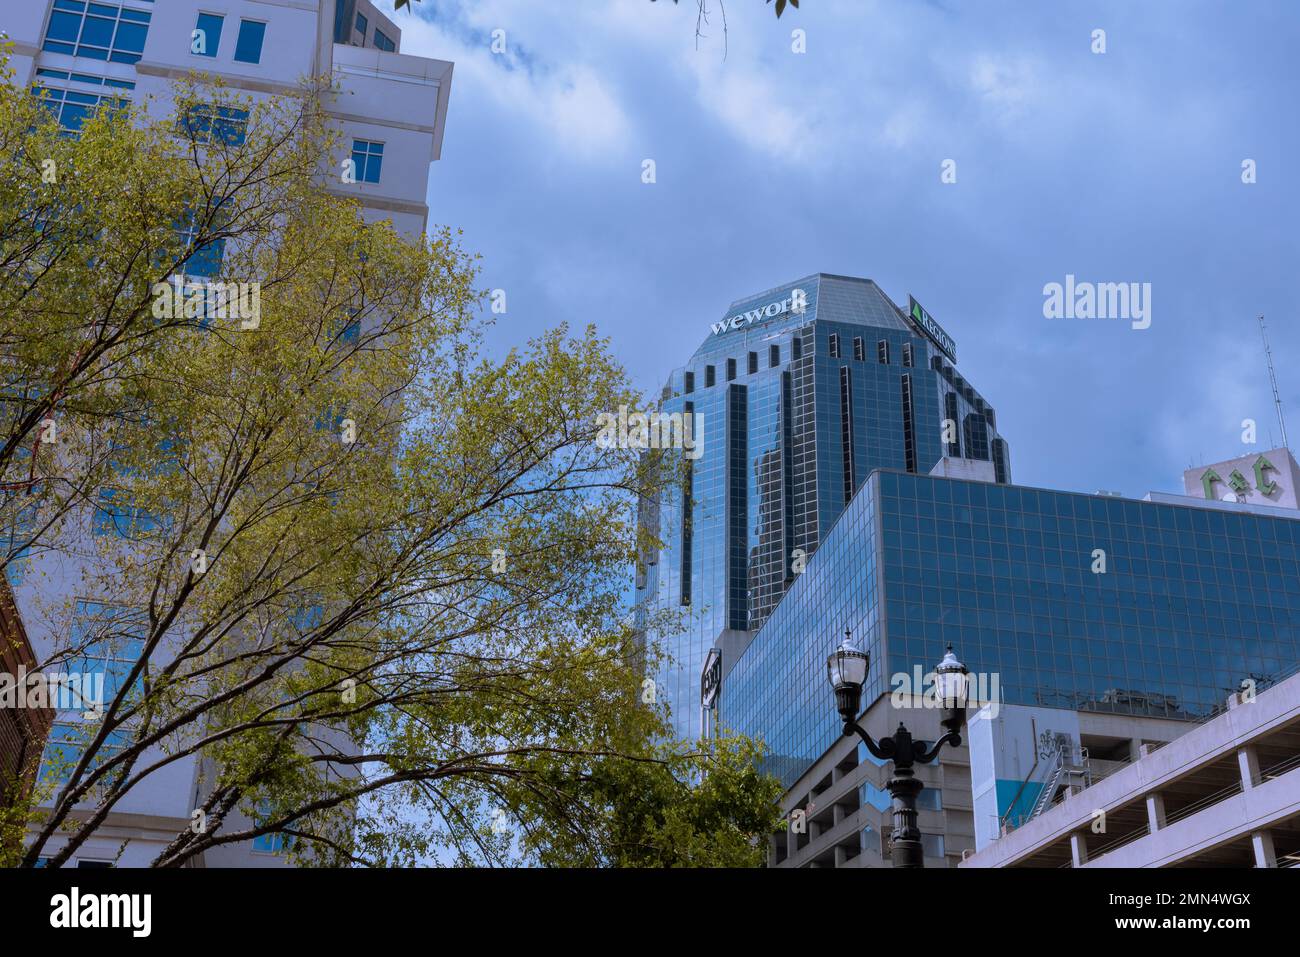 Looking up at tall glass skyscraper with office space for WeWork and Regions Bank, Nashville, Tennessee, United States. Stock Photo